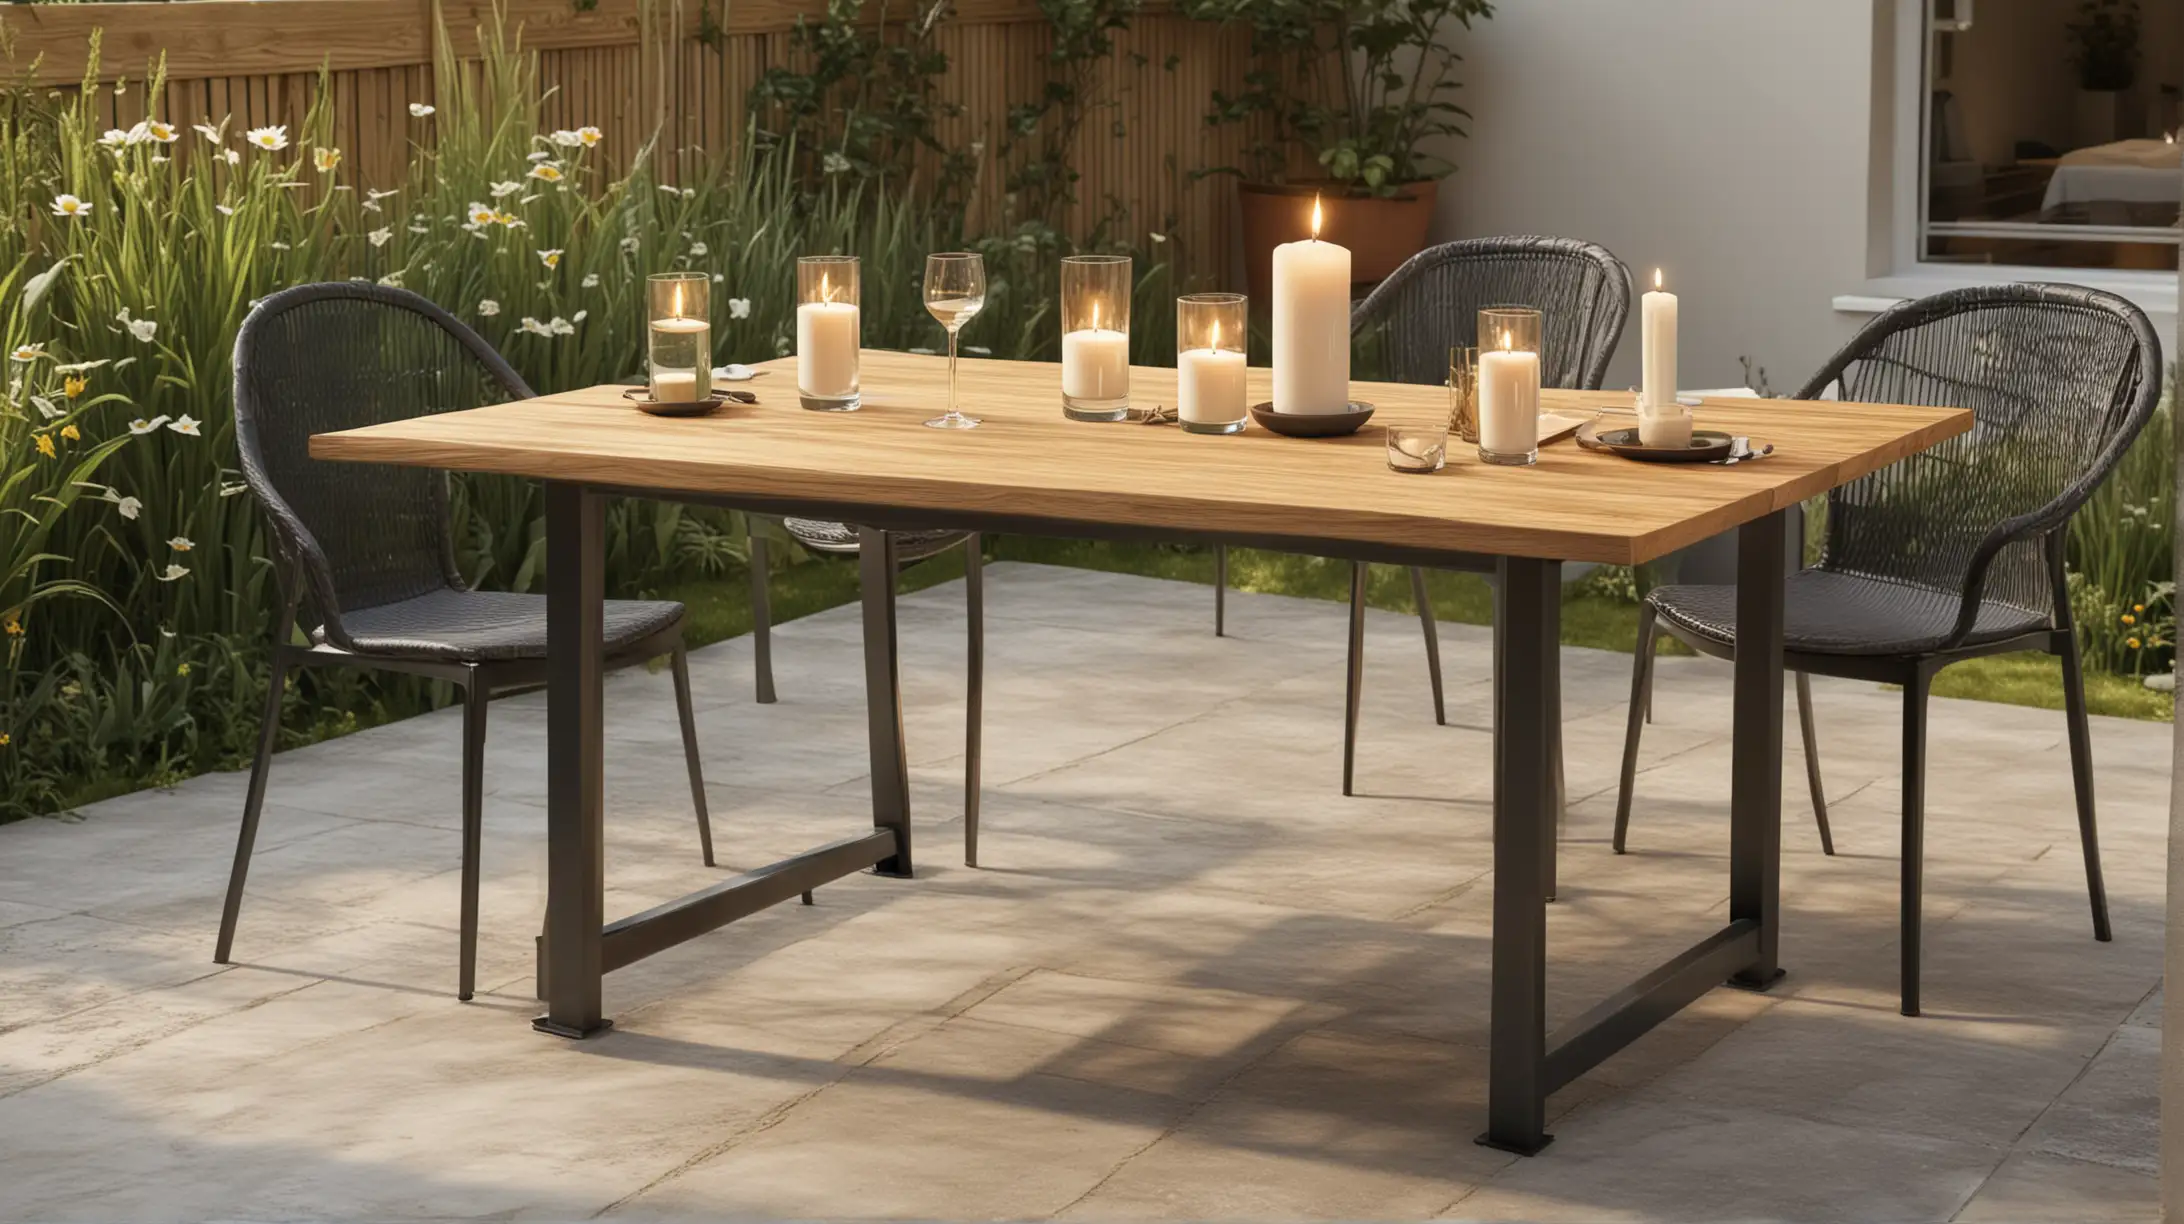 create a realistic image showing a contemporary garden patio with a modern outdoor table with a candle burning on the table on a summers day






